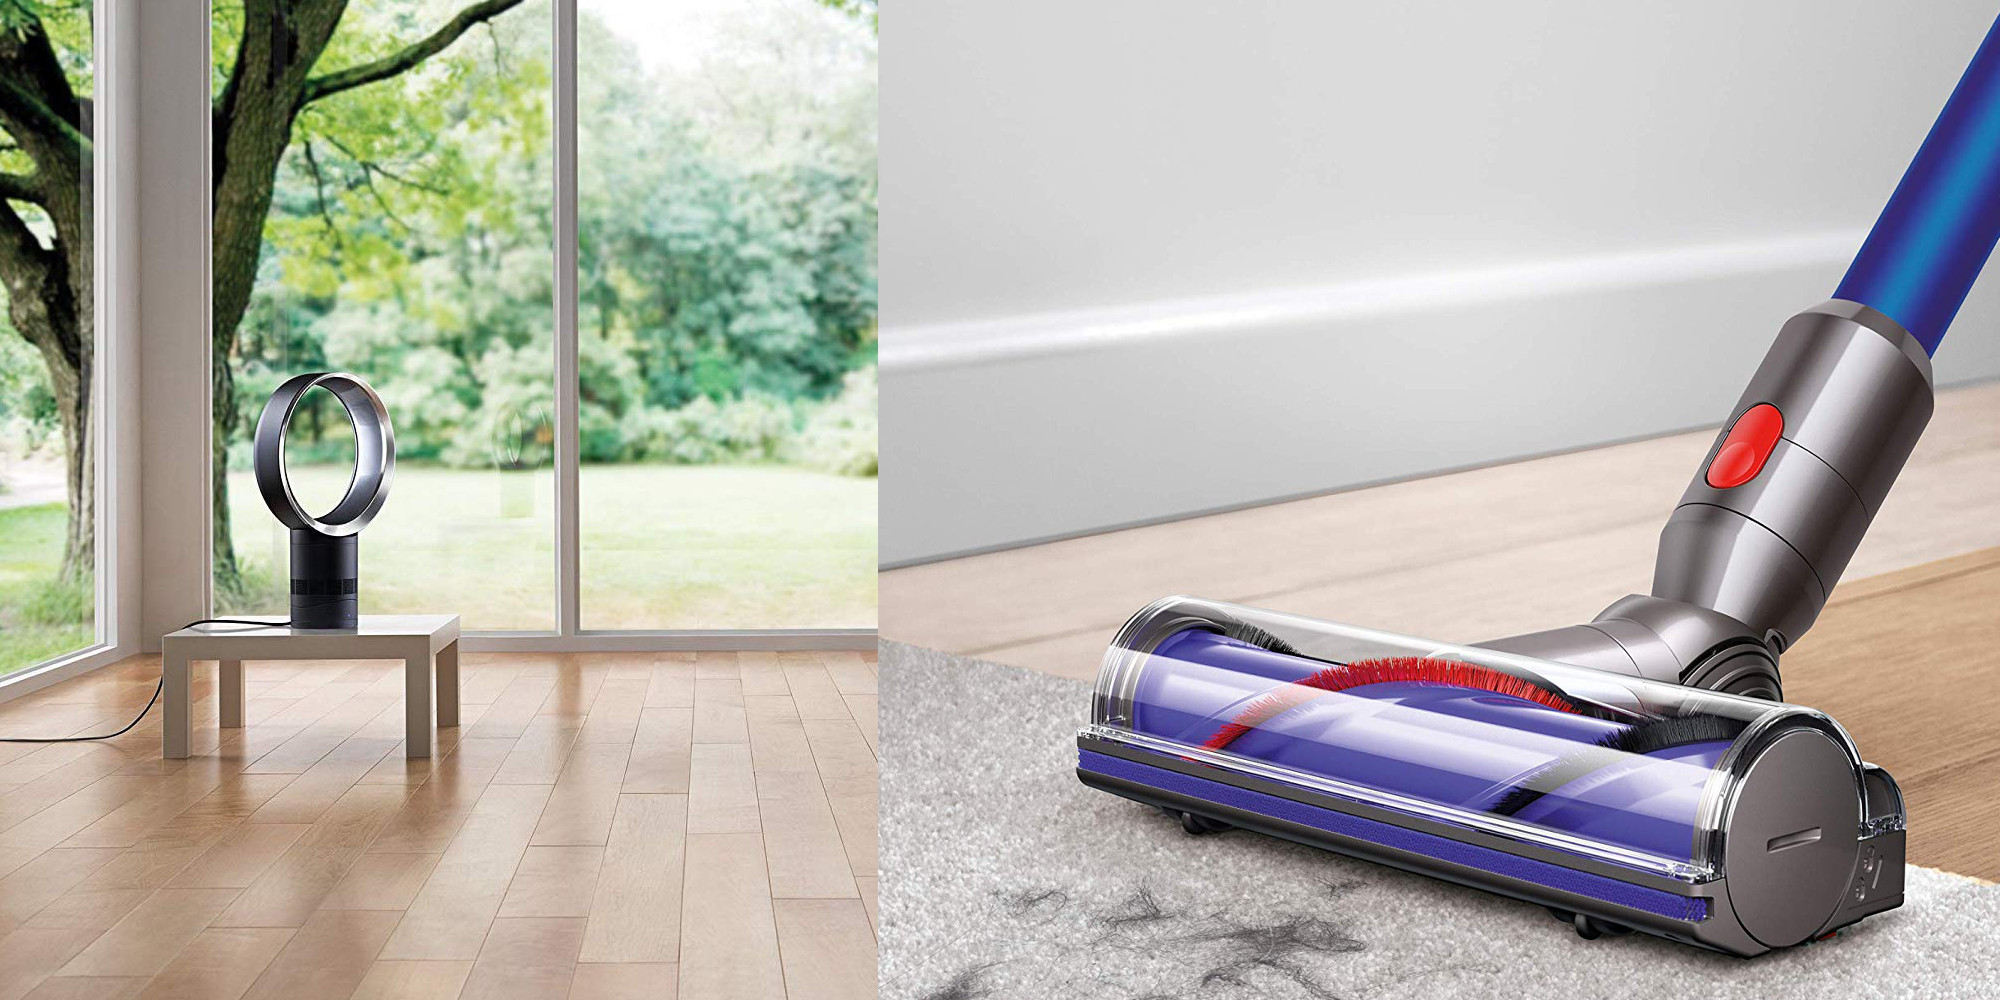 Dyson Prime Day deals up to $250 off: vacuums, fans, more from $120